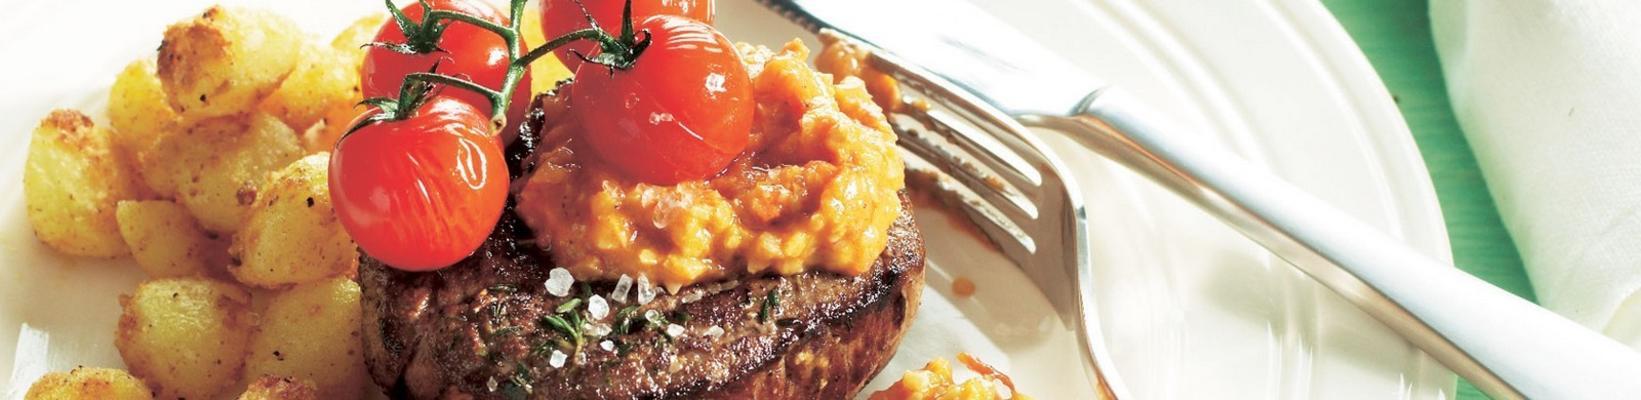 steak with roasted tomato and tomato dip